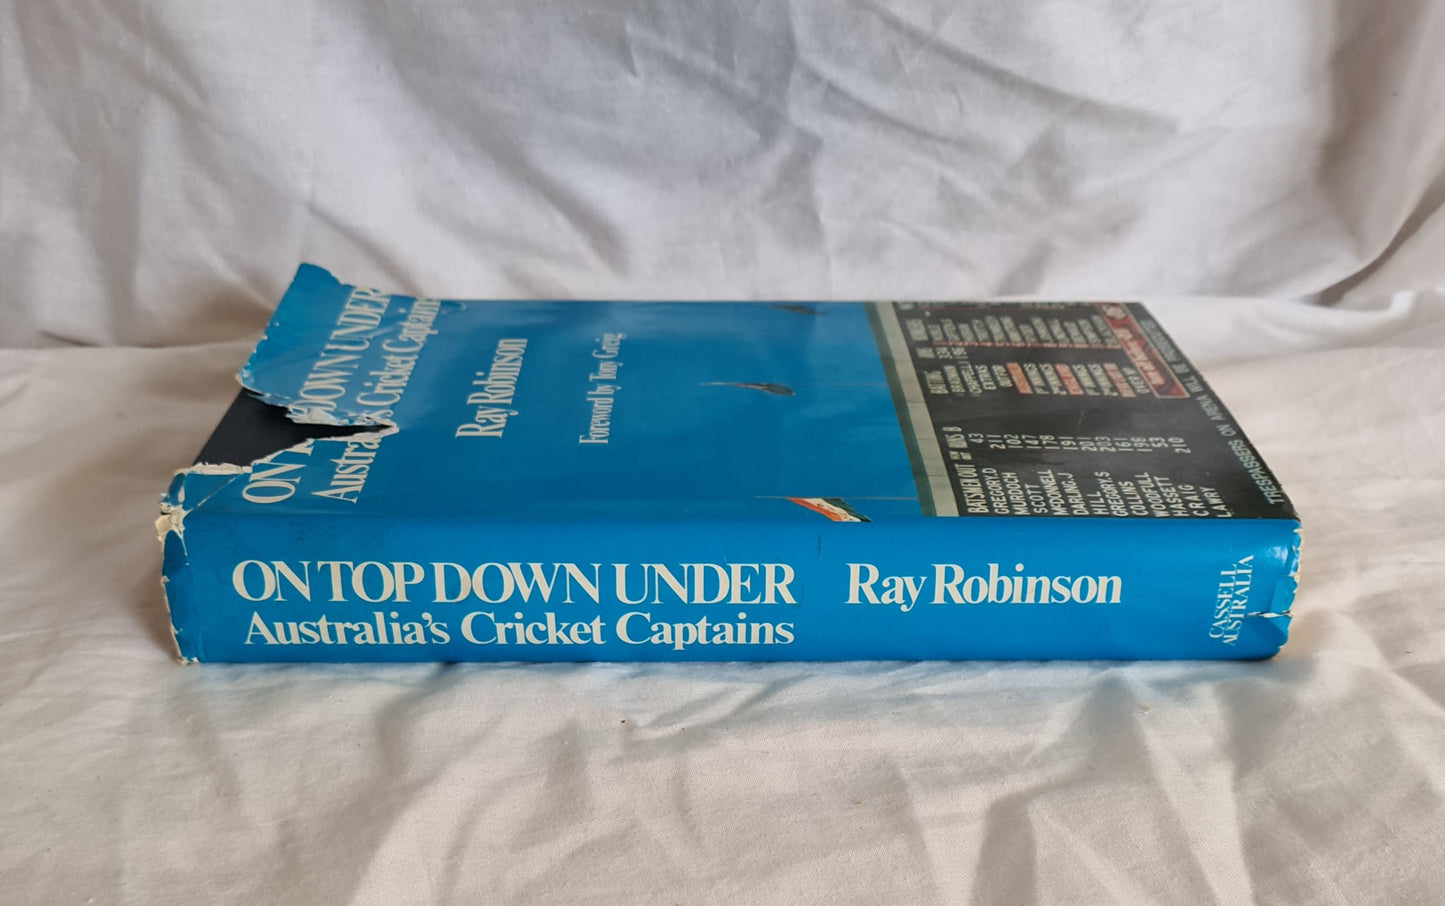 On Top Down Under by Ray Robinson